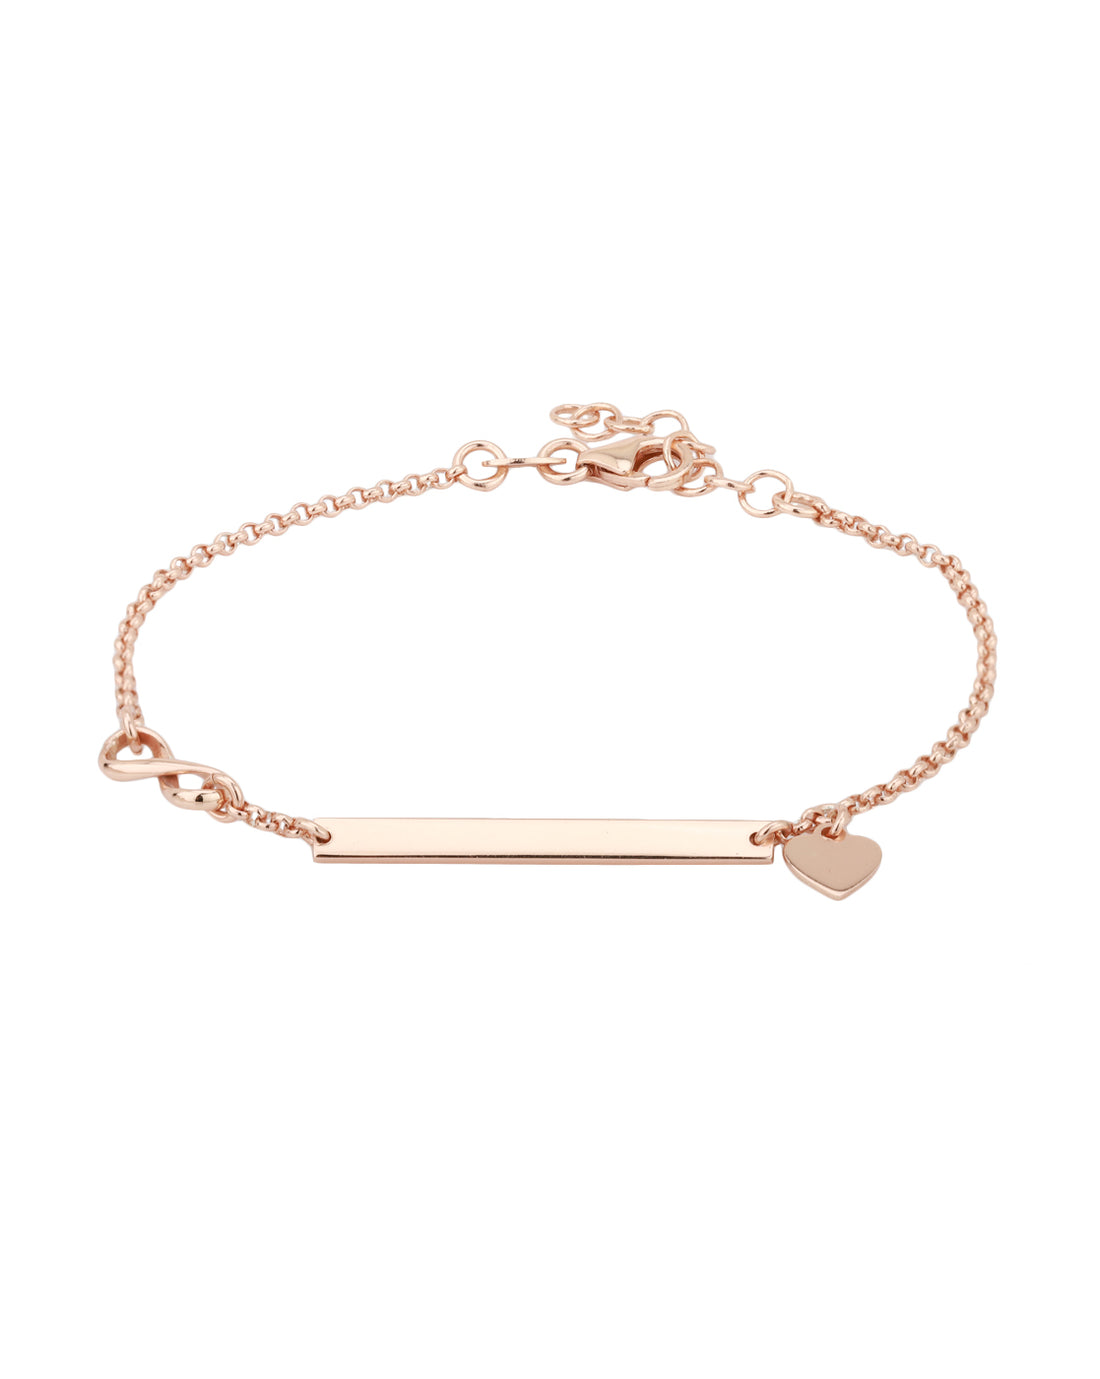 Carlton London Rose Gold Plated with Heart Charm Bracelet